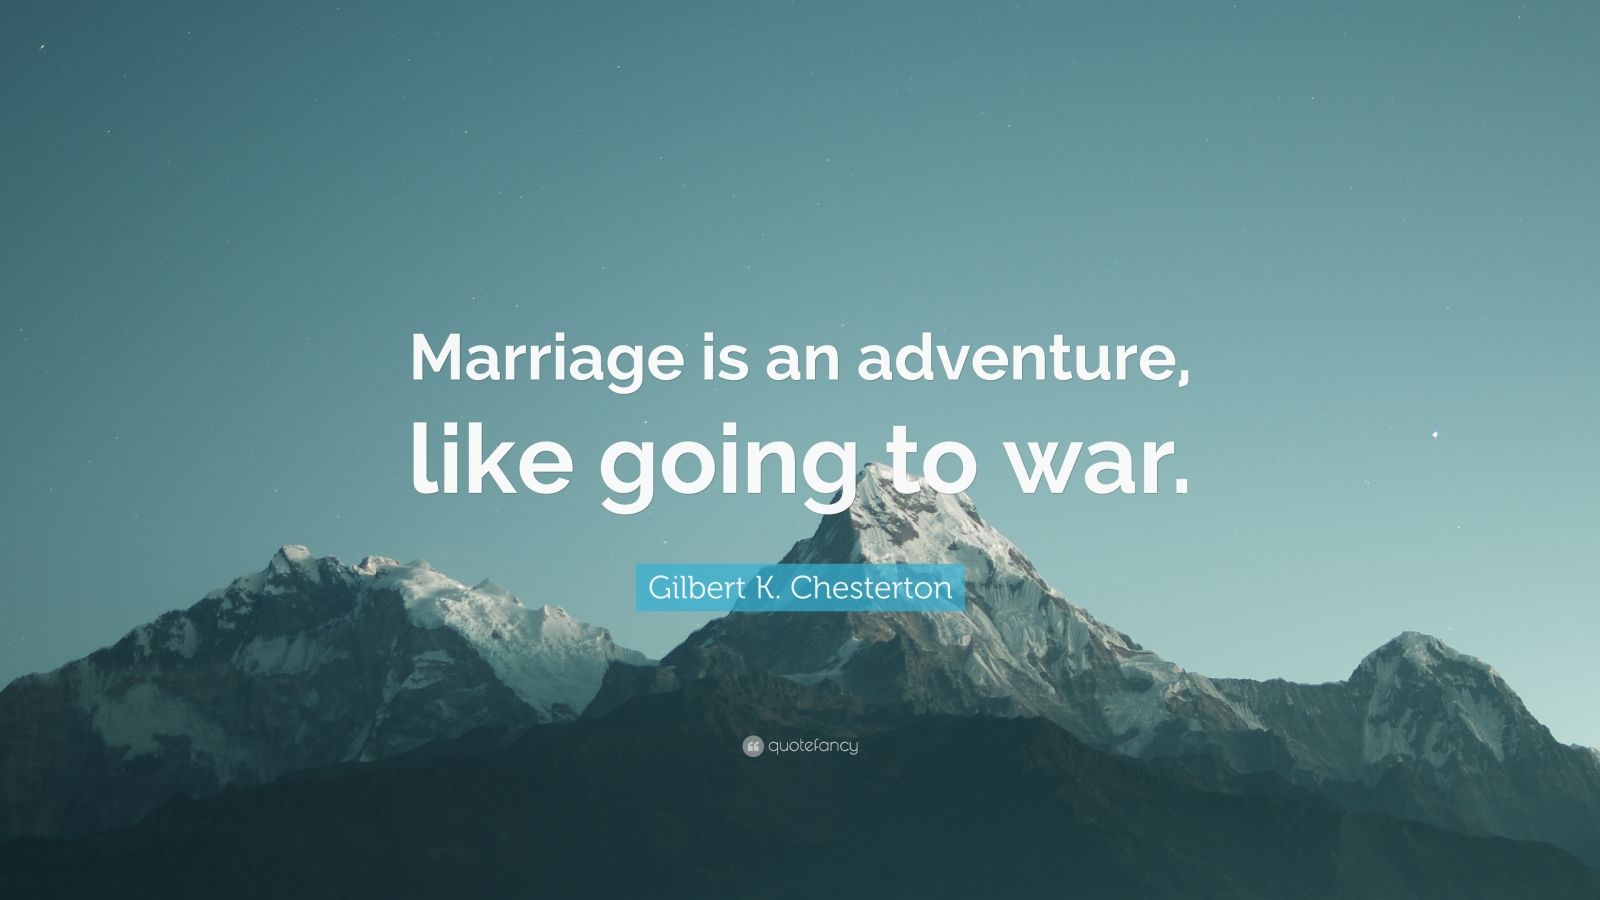 Gilbert K. Chesterton Quote: "Marriage is an adventure, like going to war." (12 wallpapers ...